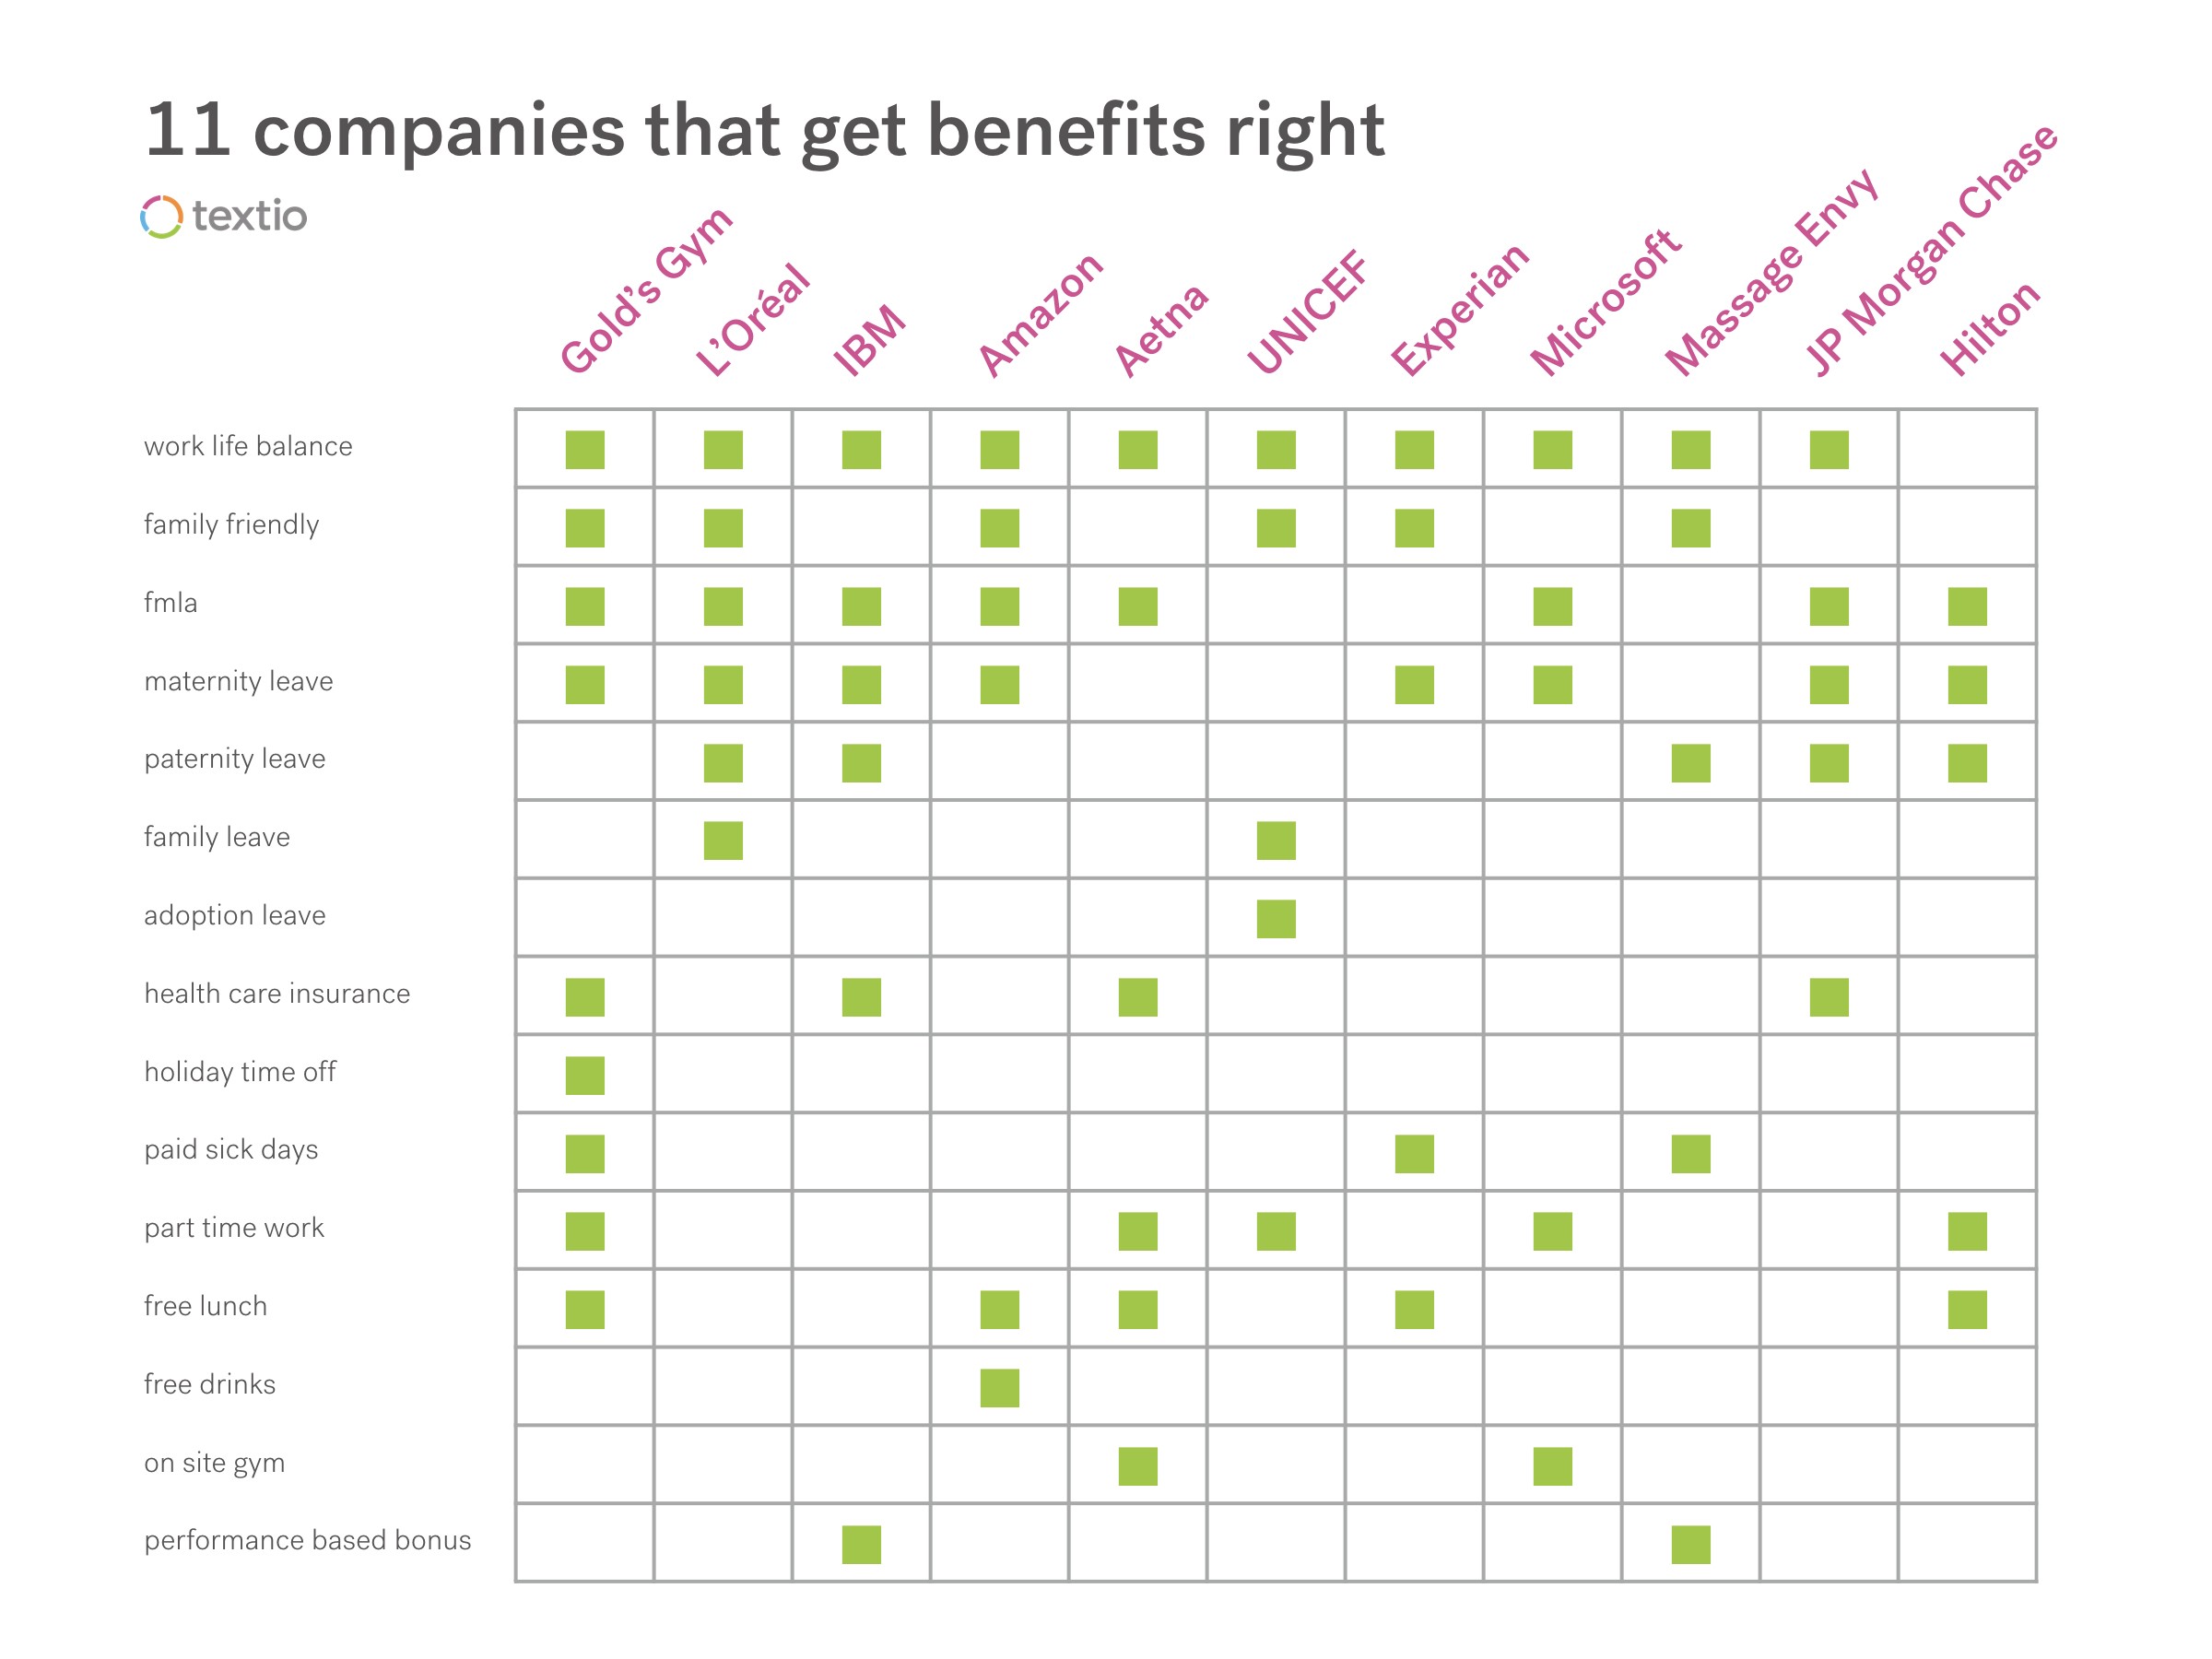 A table showing 11 companies on top and a list of benefits down the left